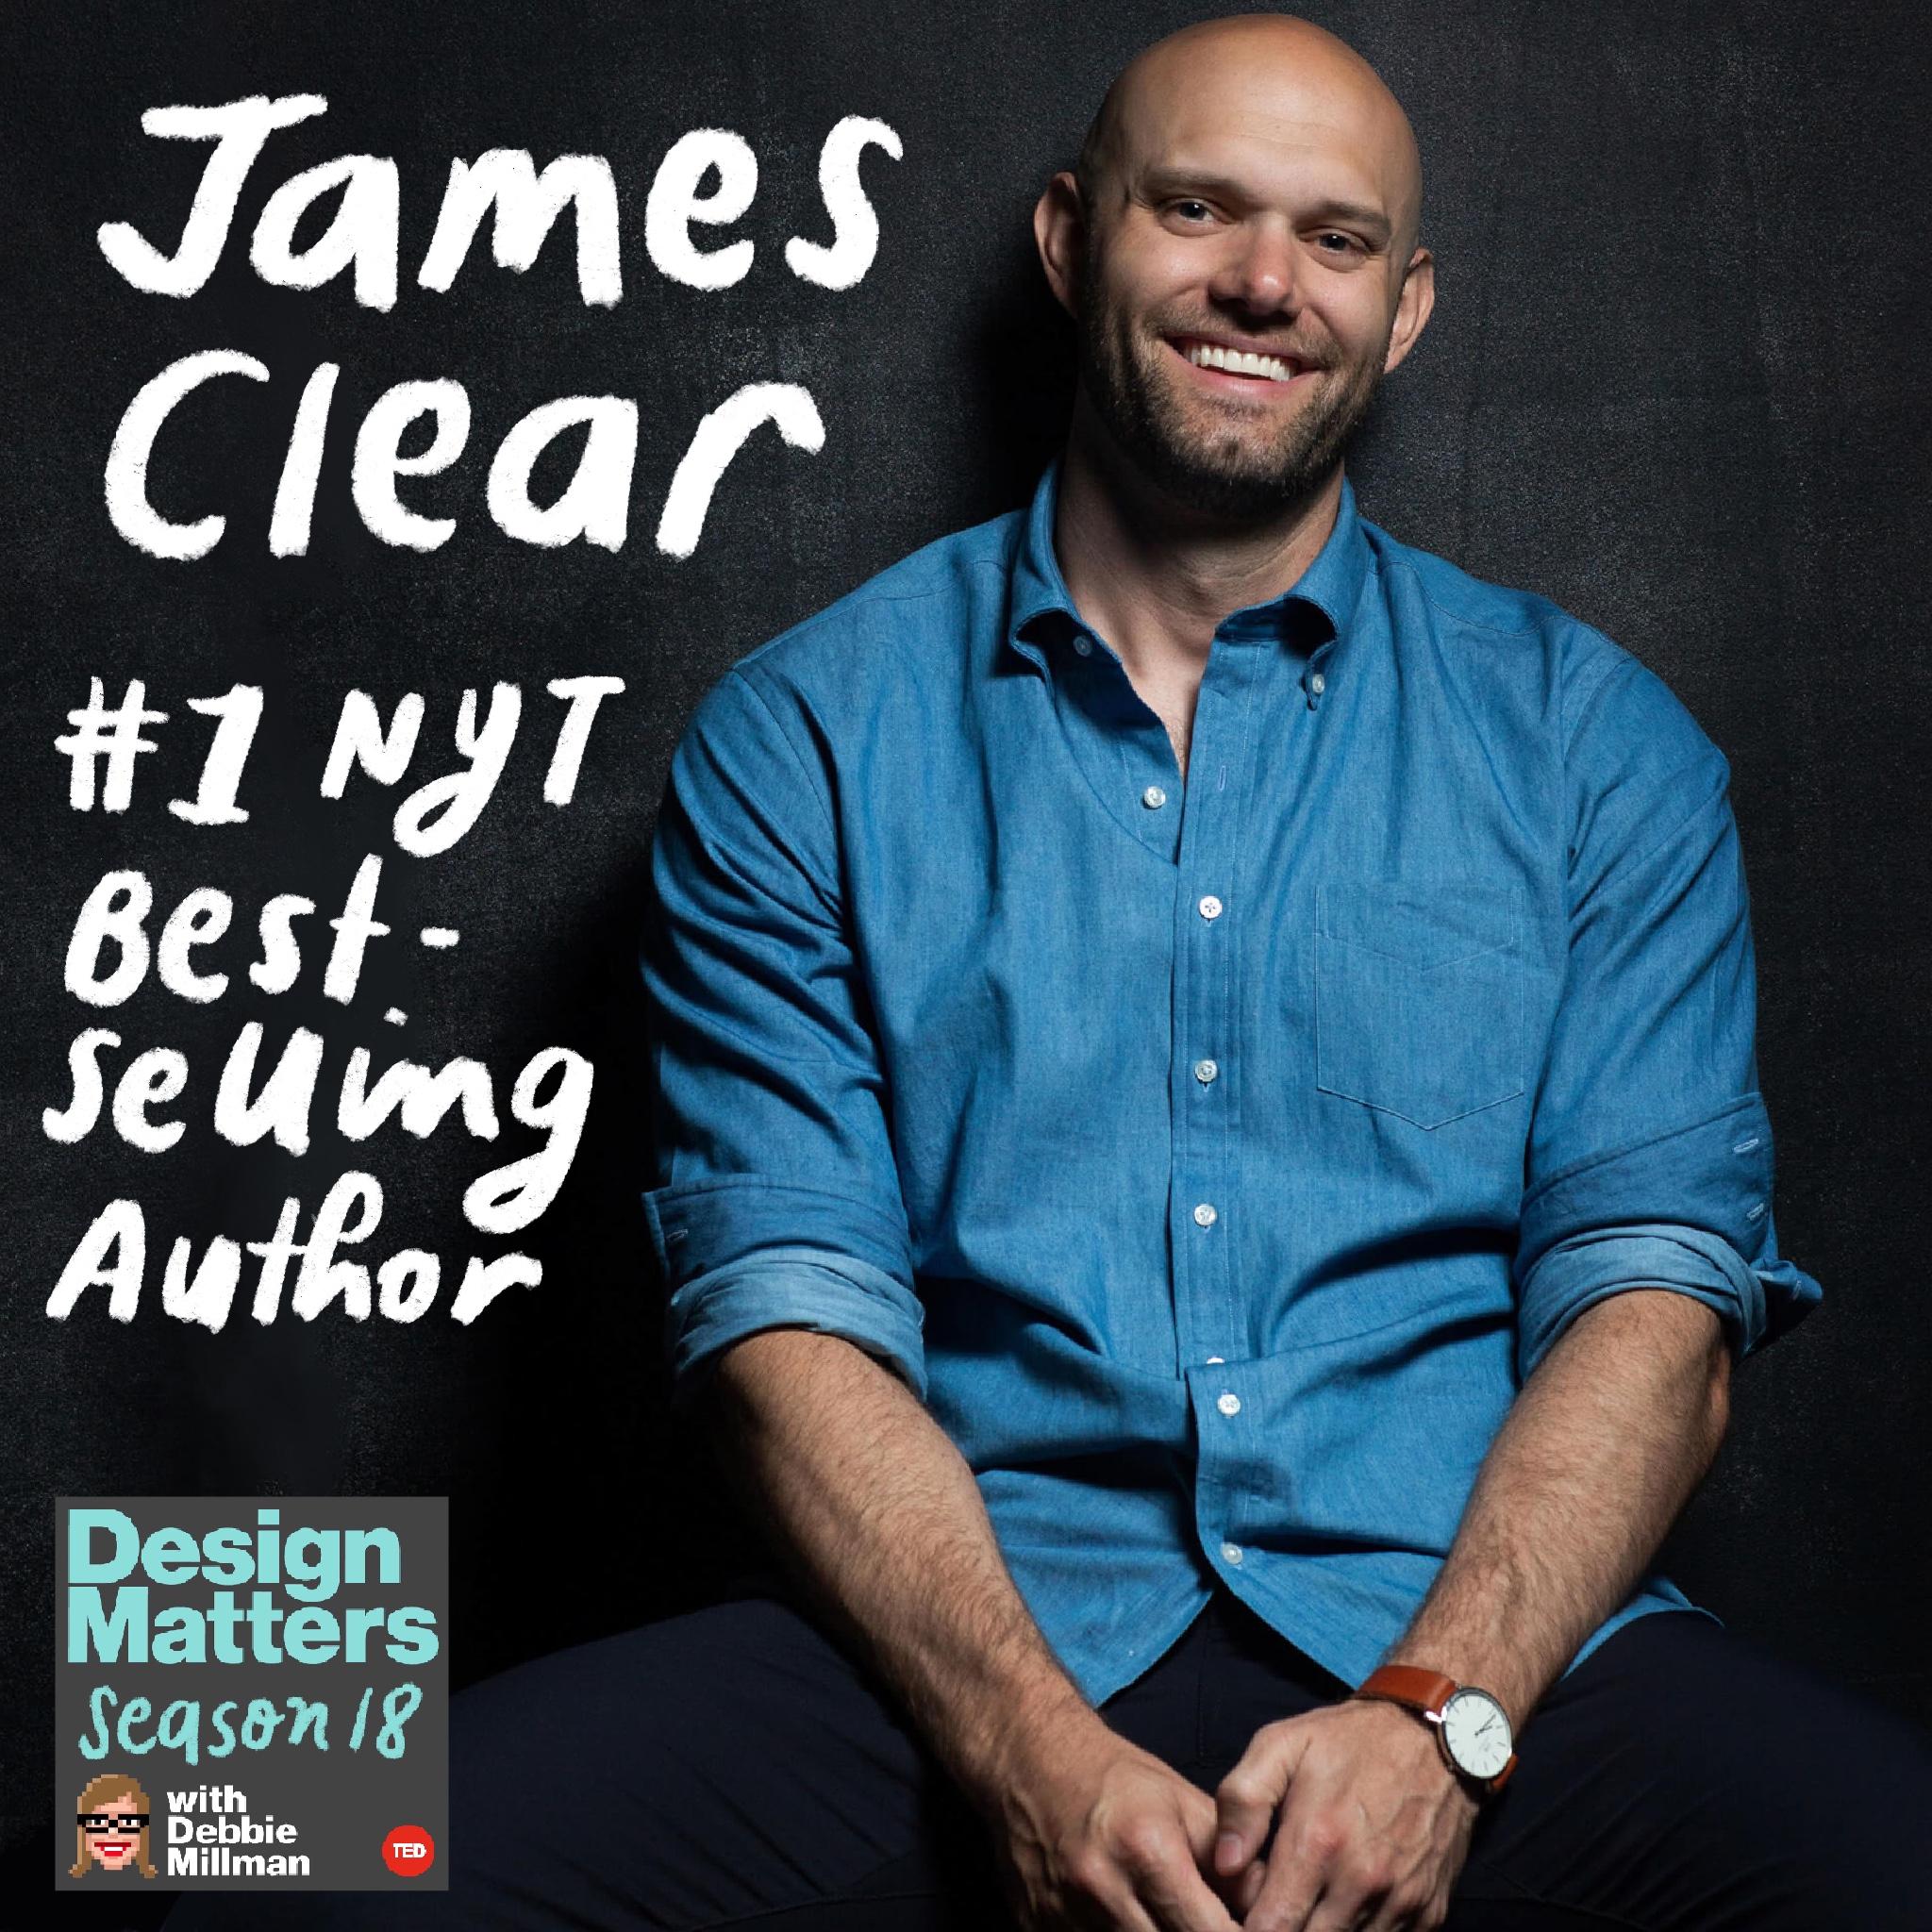 Thumbnail for "Best of Design Matters: James Clear ".